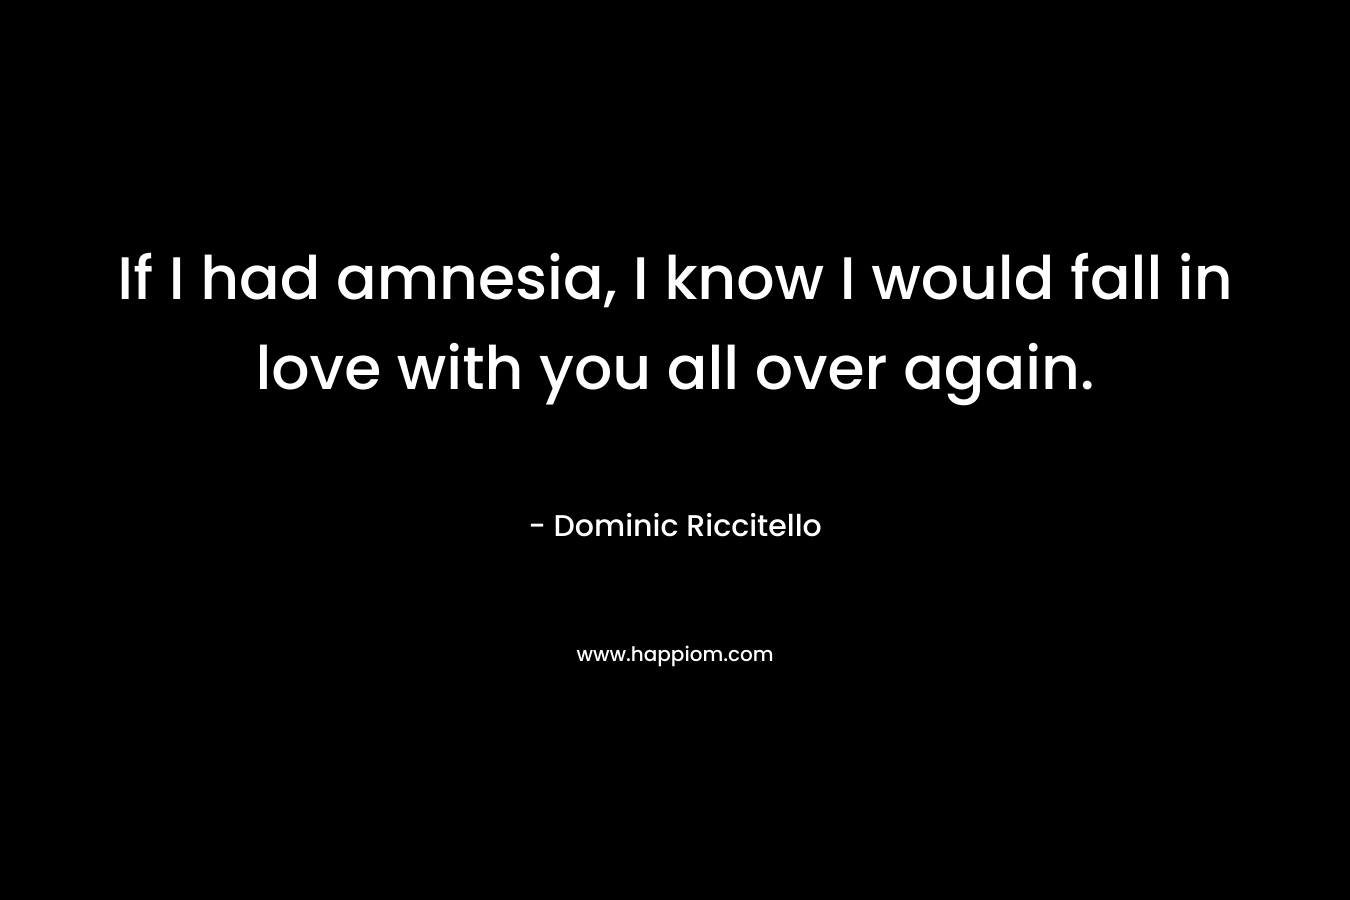 If I had amnesia, I know I would fall in love with you all over again. – Dominic Riccitello